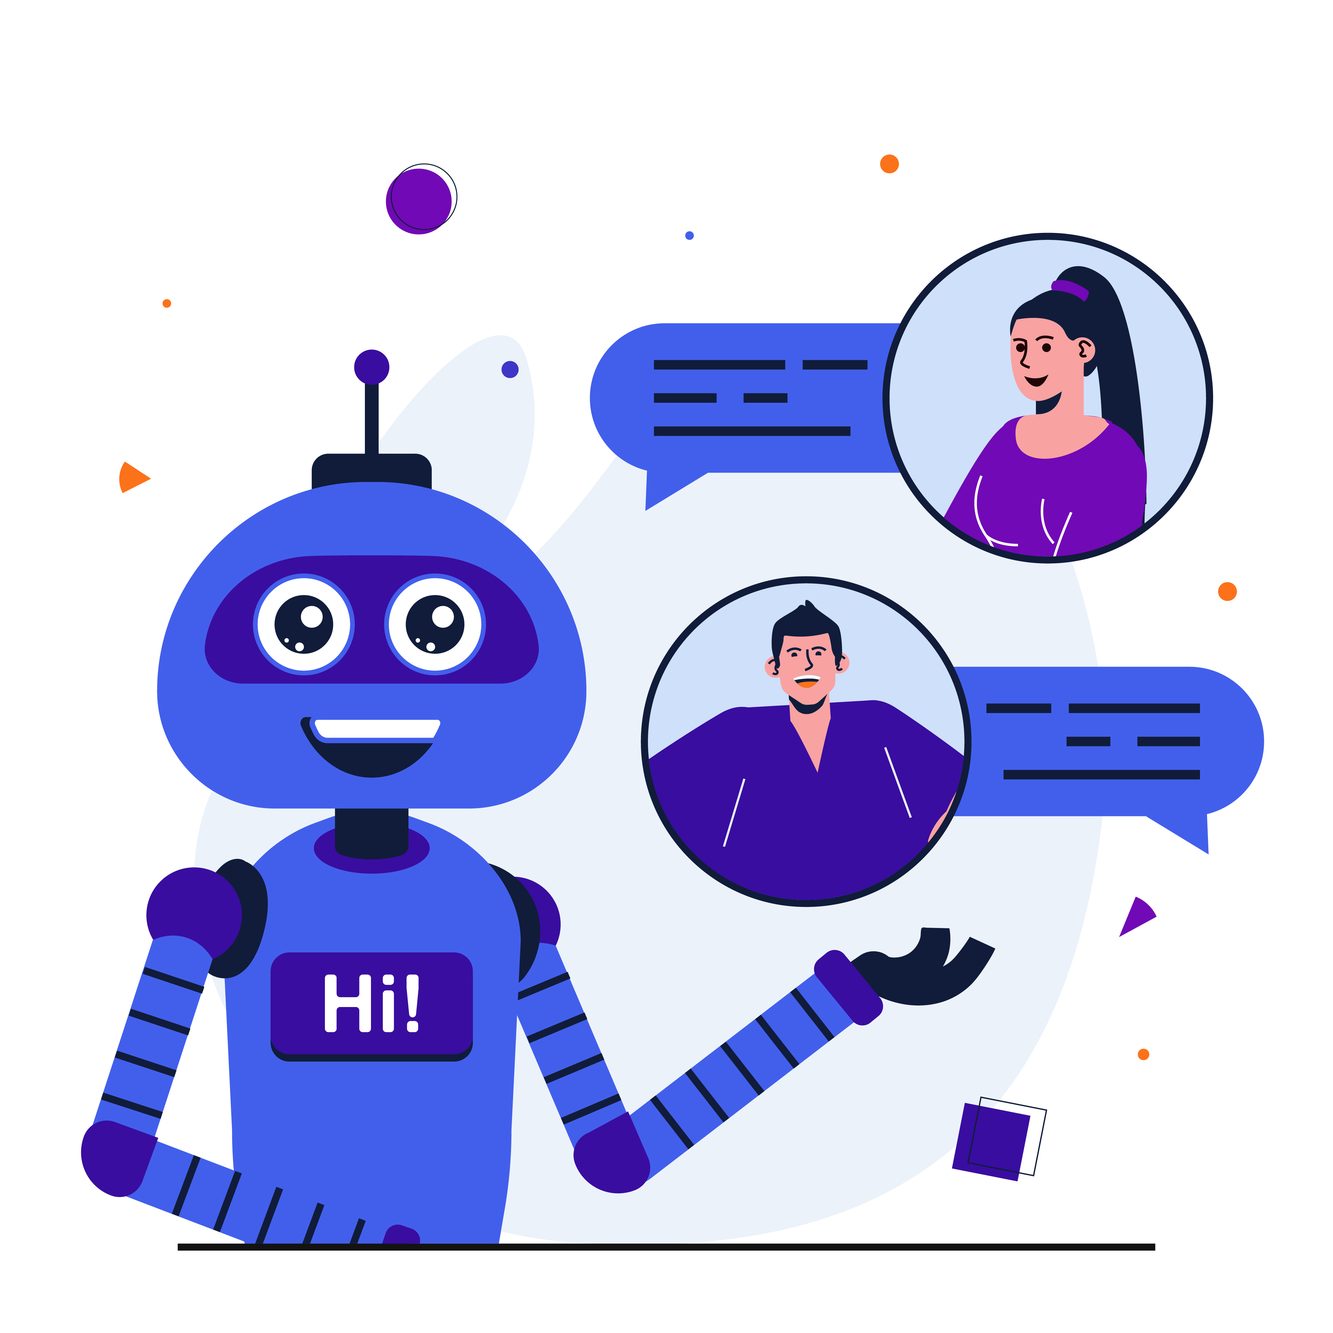 Virtual assistant modern flat concept for web banner design. Artificial intelligence robot responds to customer messages, helps and advises in app. Illustration with isolated people scene